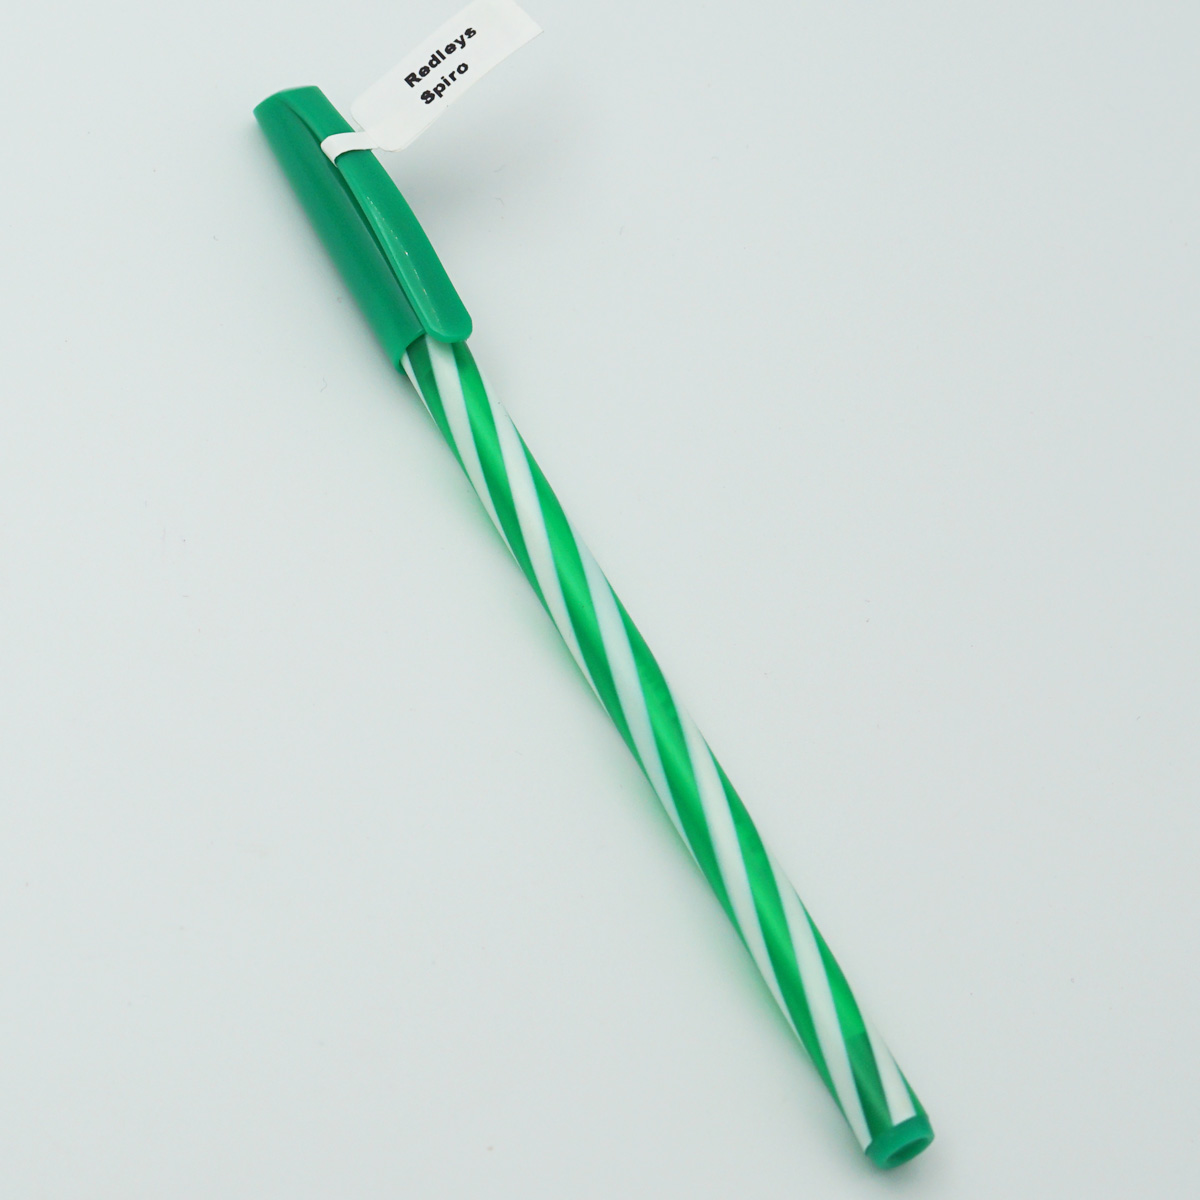 Ridleys Spiro 0.7 Green With White Color Body And Green Color Cap Blue Writing Cap Type Ball Pen SKU 23870